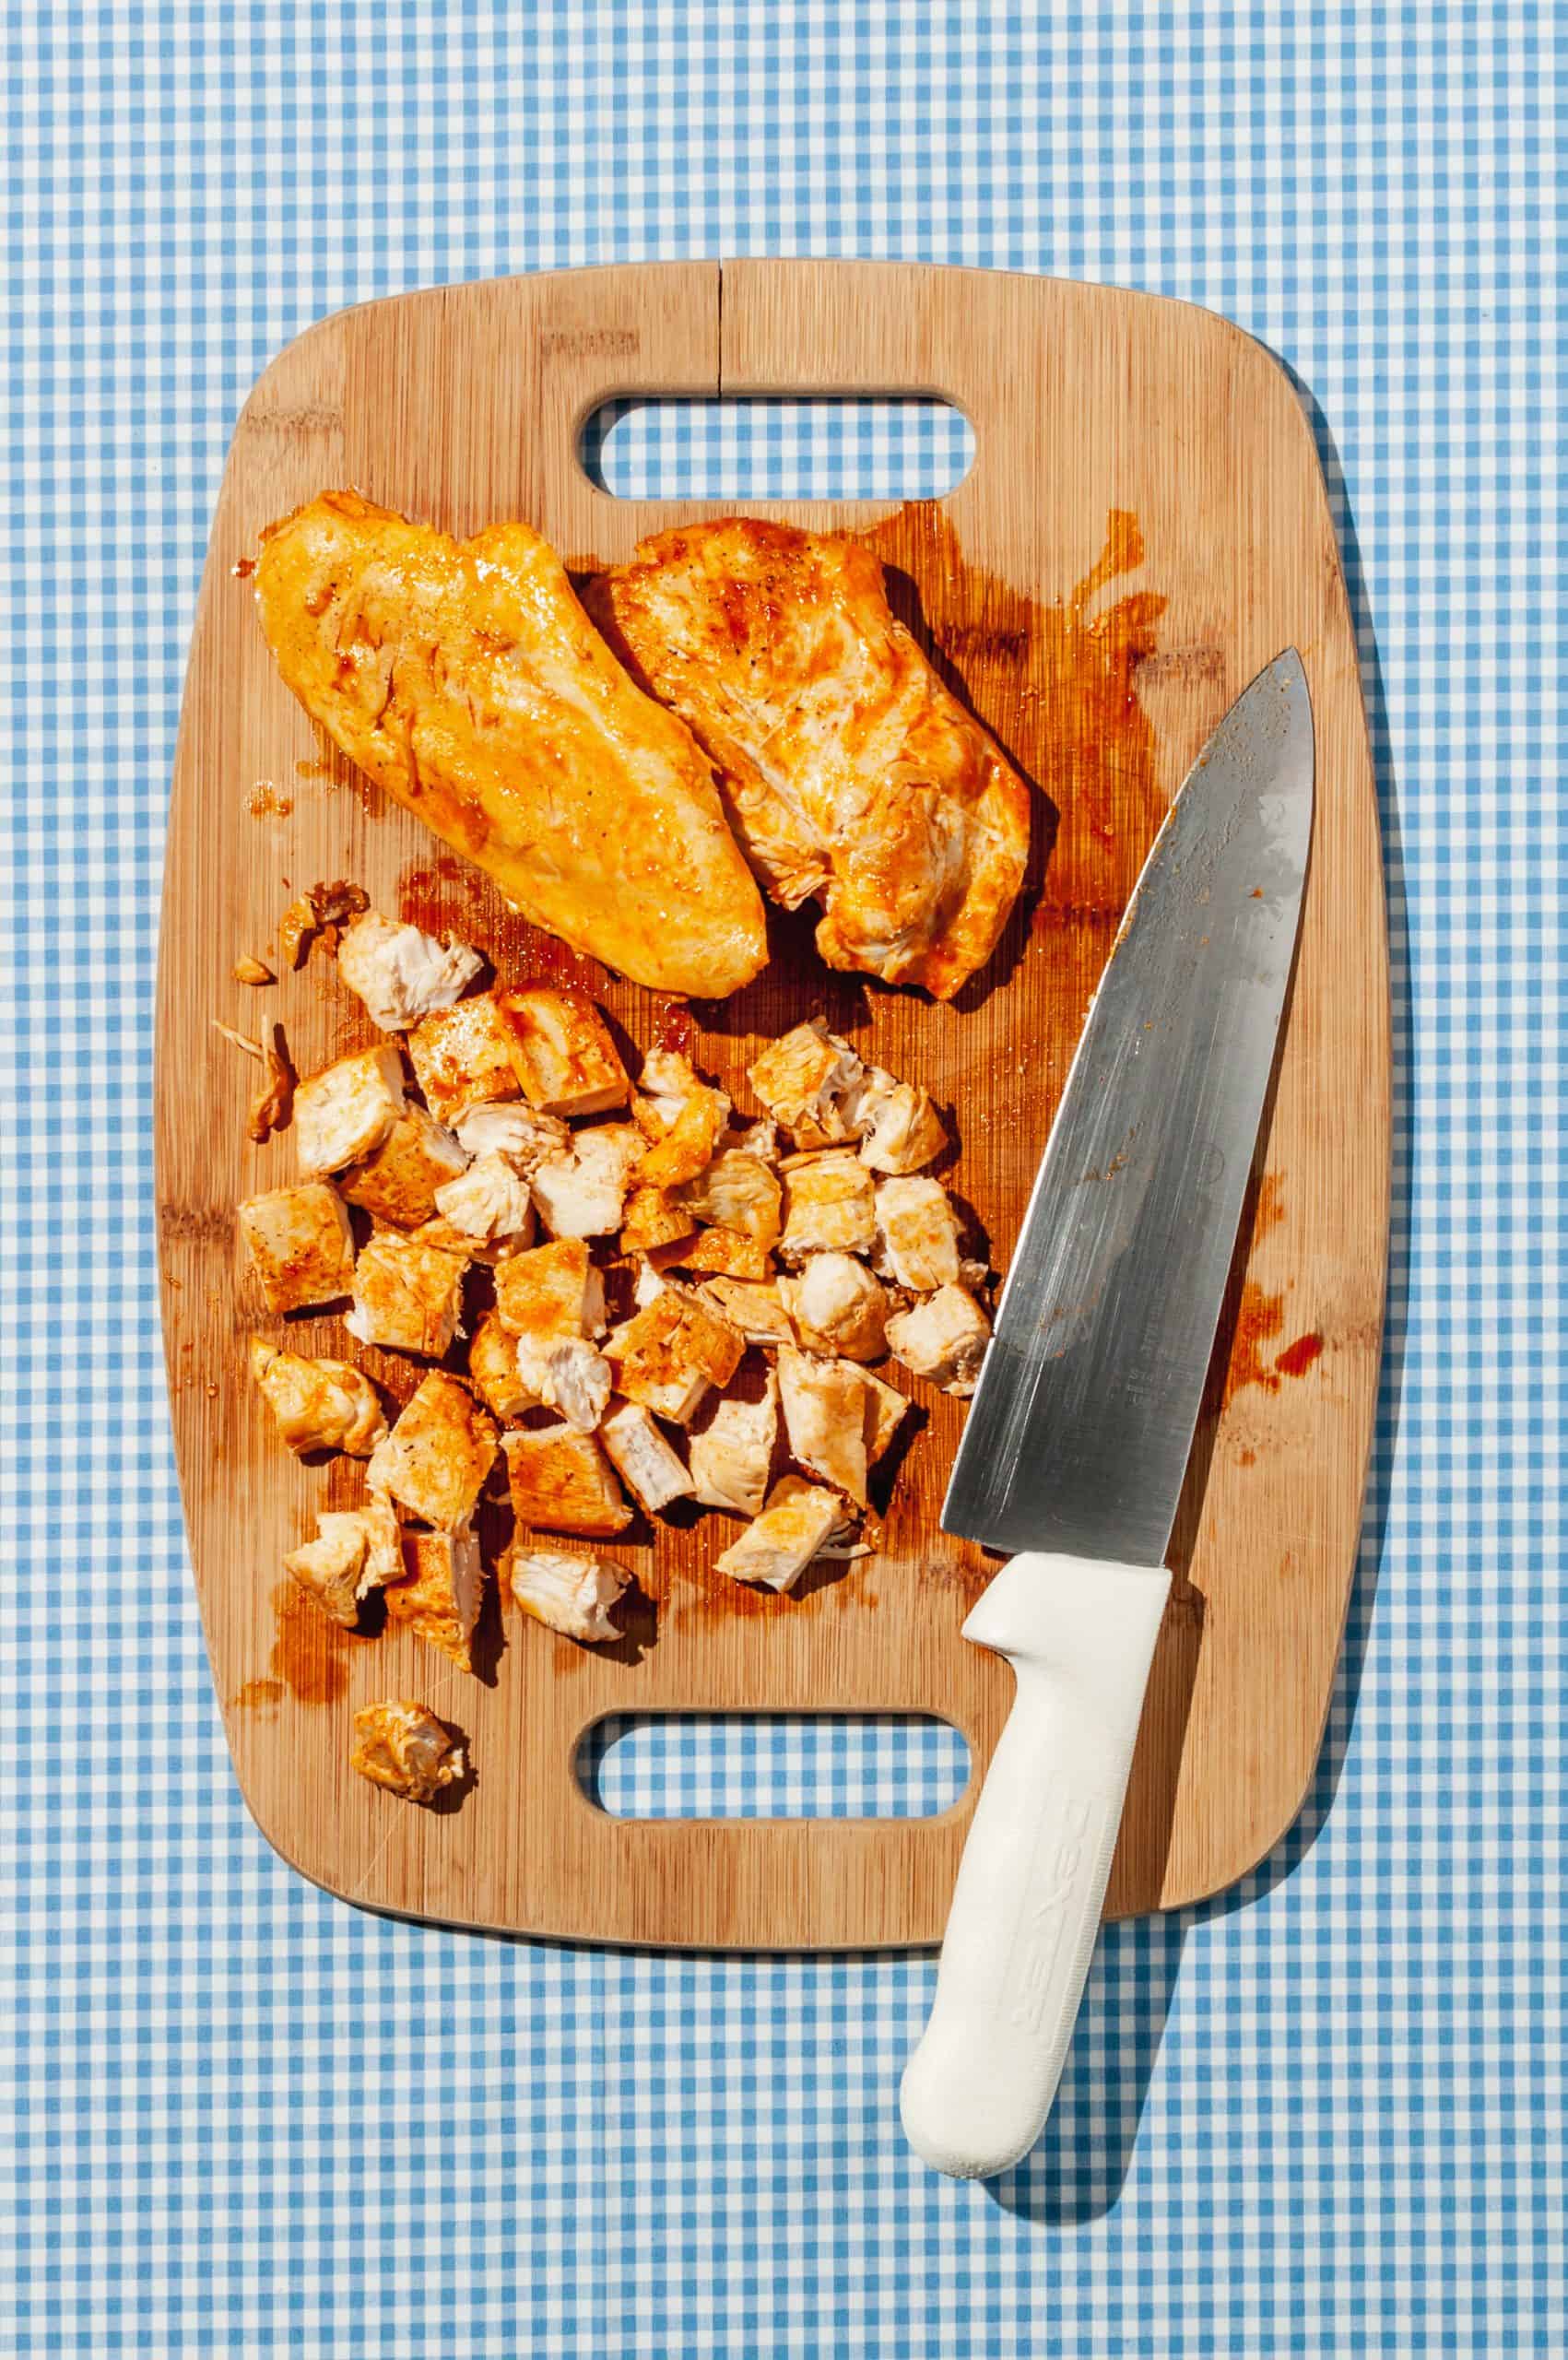 chicken breast lightly coated in hot sauce on a cutting board, some diced some whole